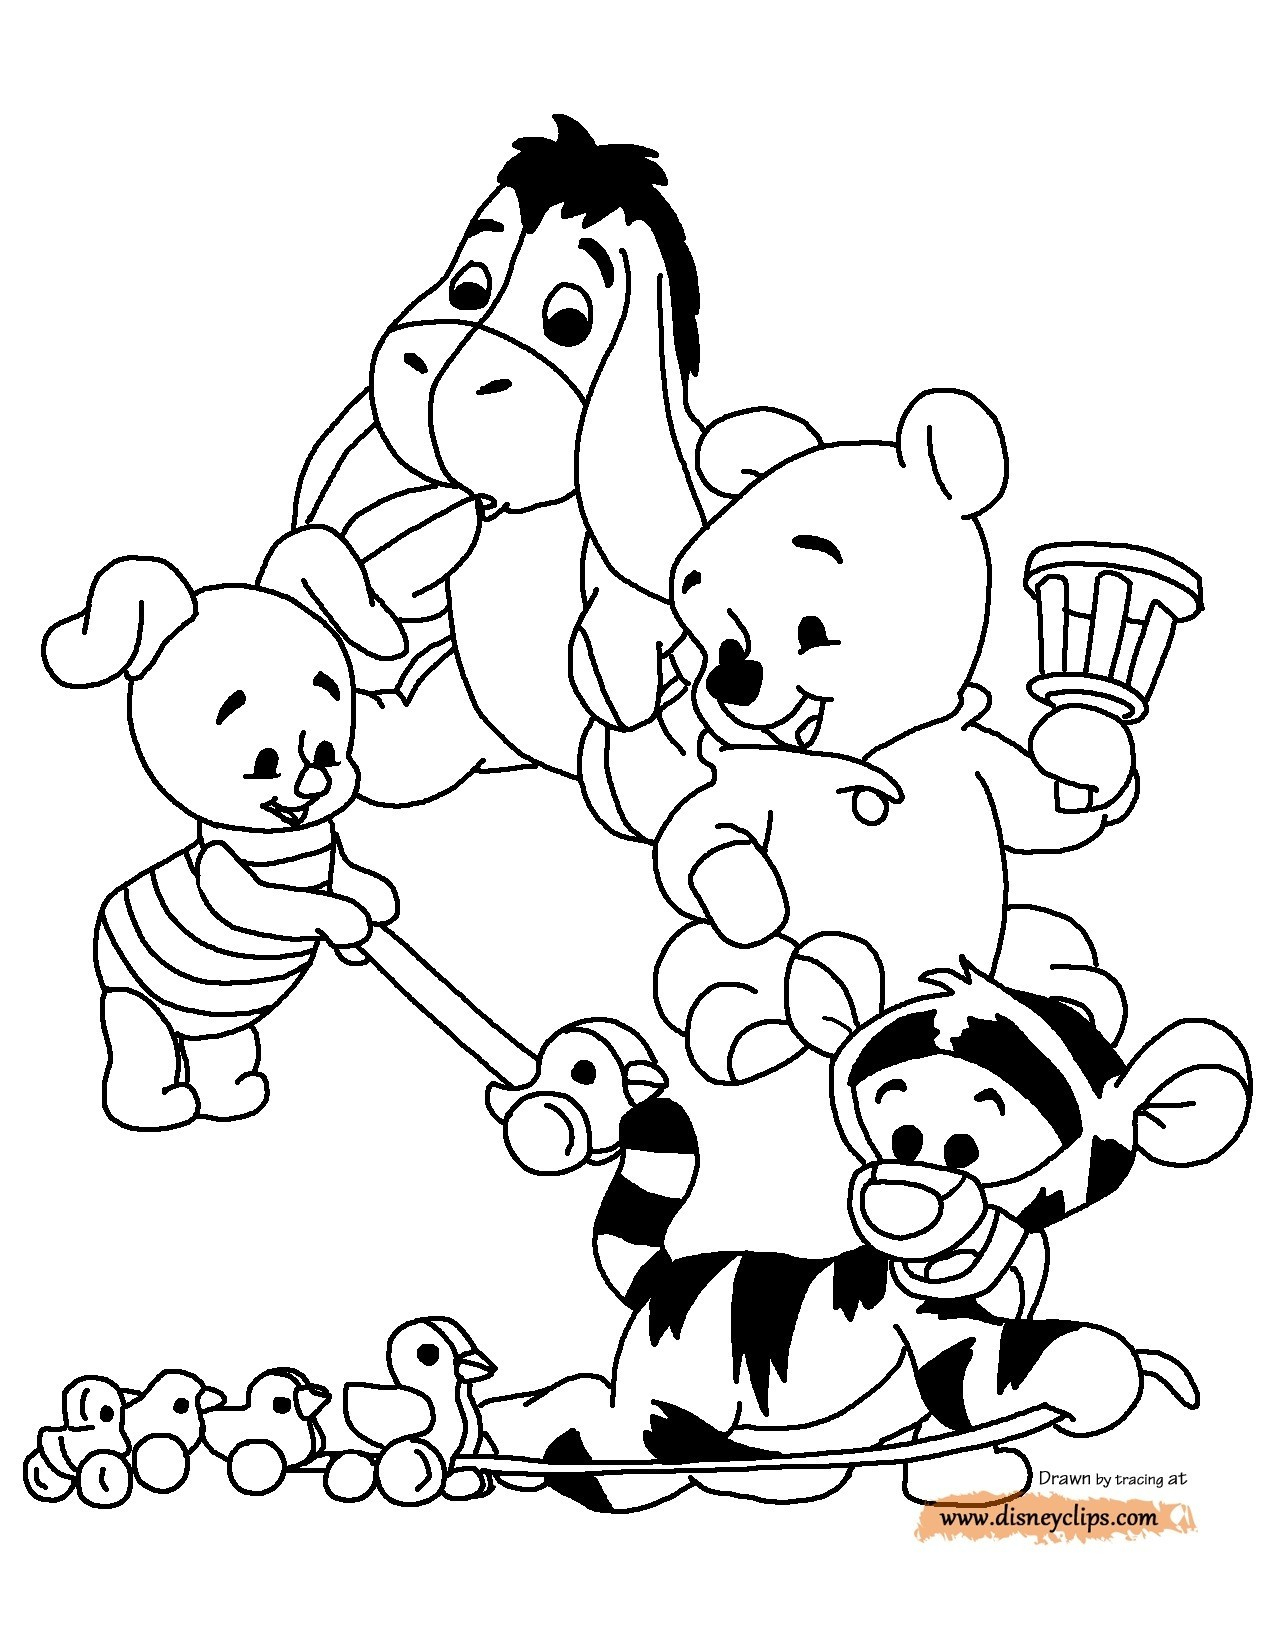 Winnie The Pooh Coloring Pages Online Coloring Ideas Winnie The Pooh Coloring Book Pdf Photo